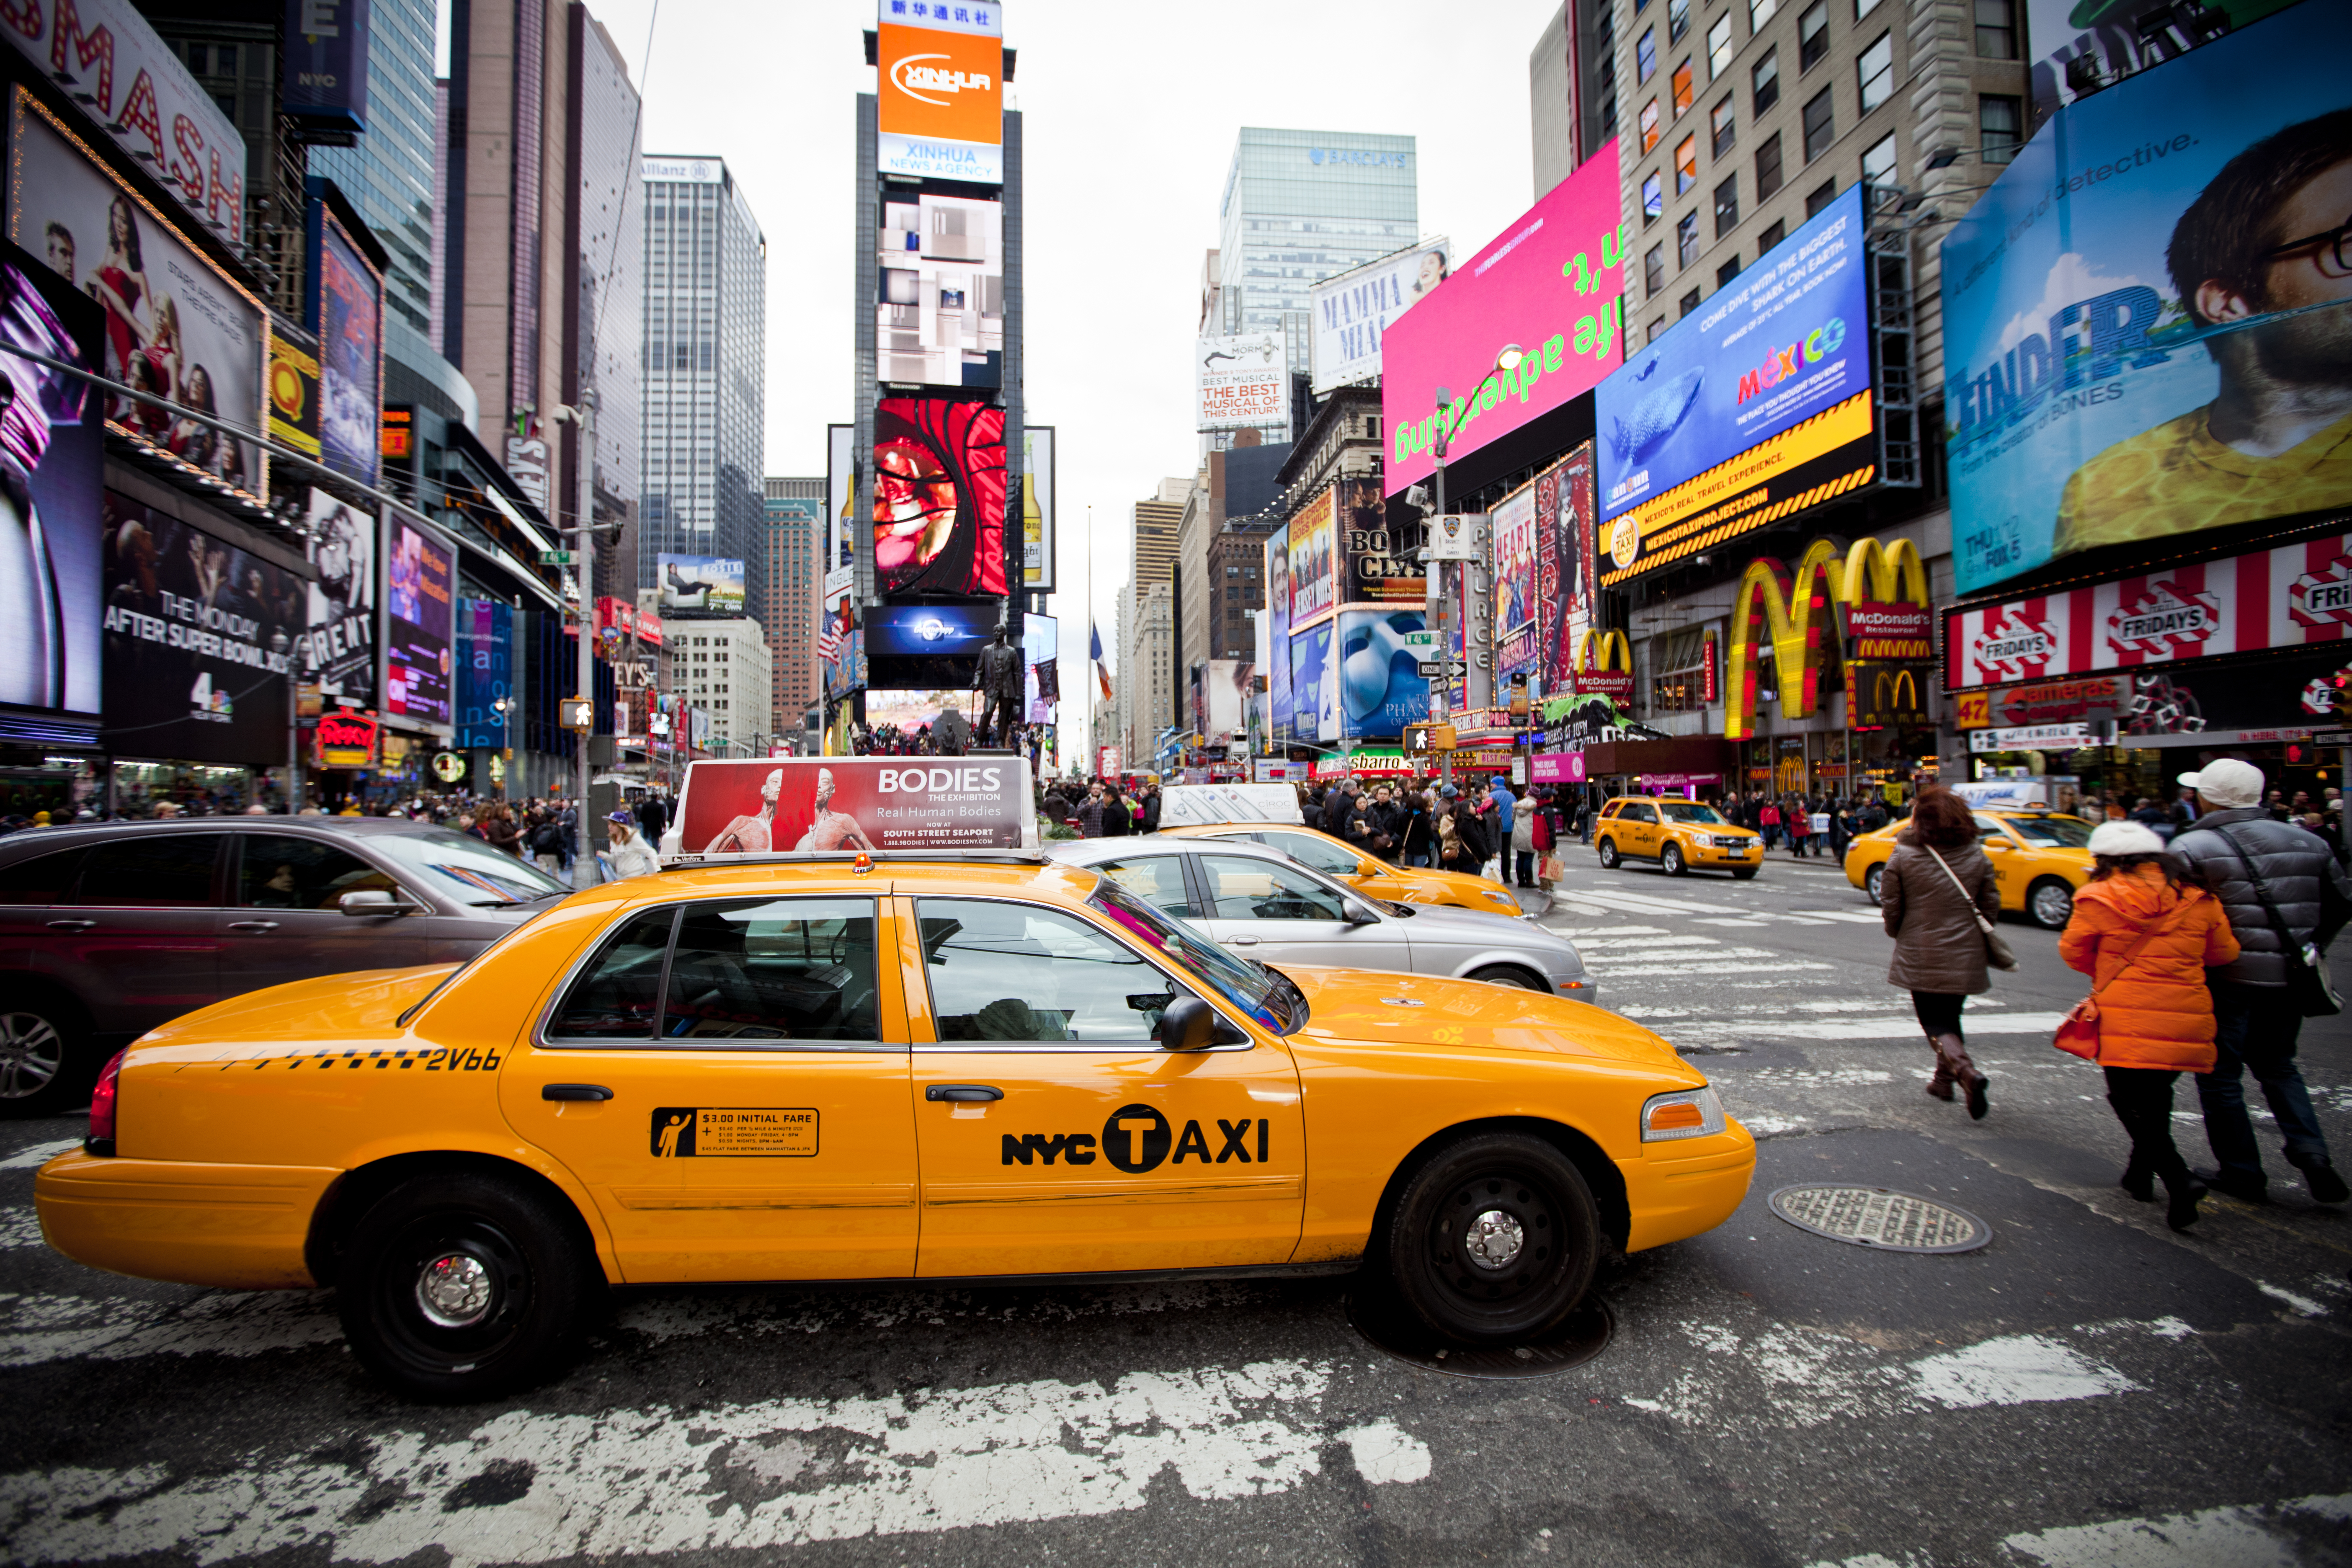 Yellow cab speeds through Times Square the busy tourist intersection of neon art | Source: Shutterstock.com